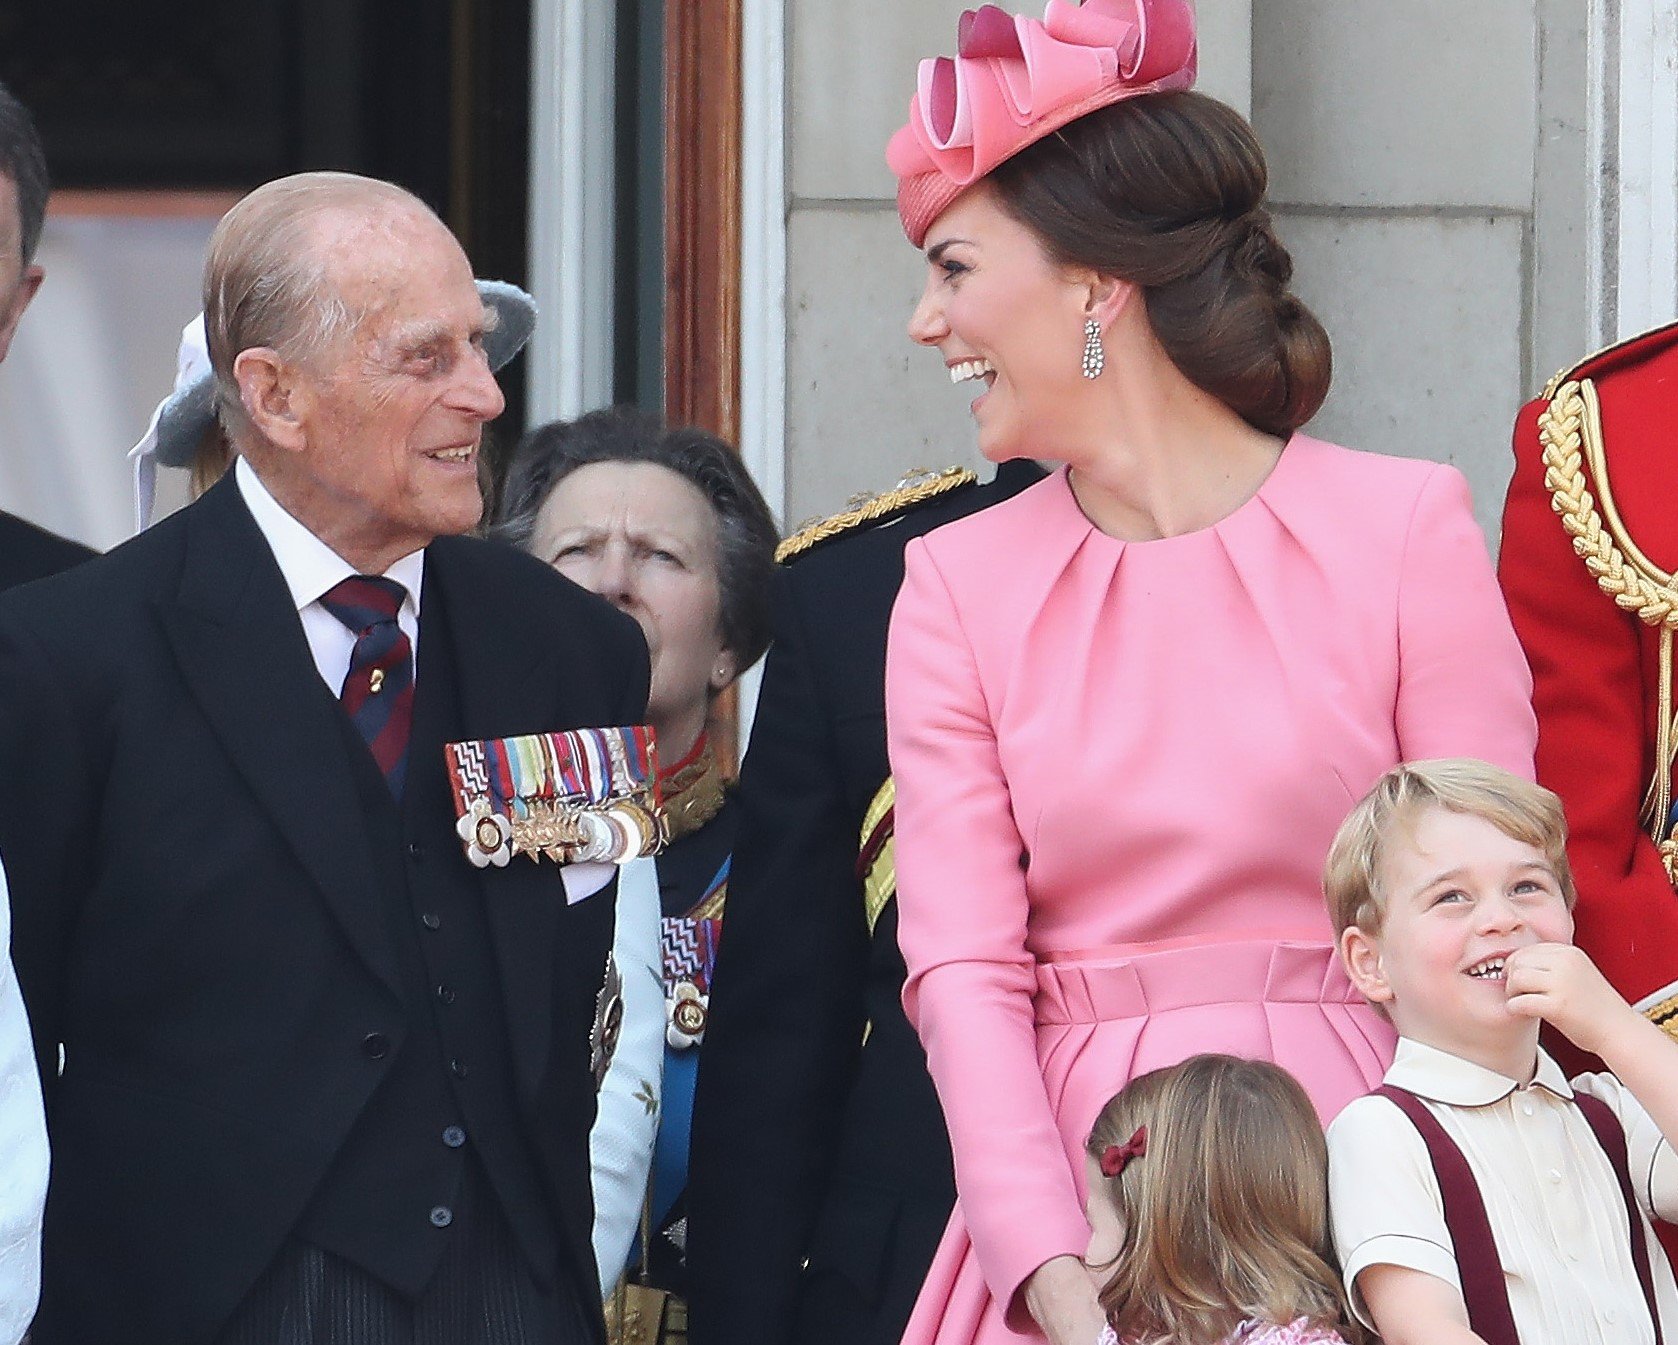 Prince Philip, Kate Middleton and her children, Princess Charlotte and Prince George, standing on the balcony of Buckingham Palace during the Trooping the Colour parade 